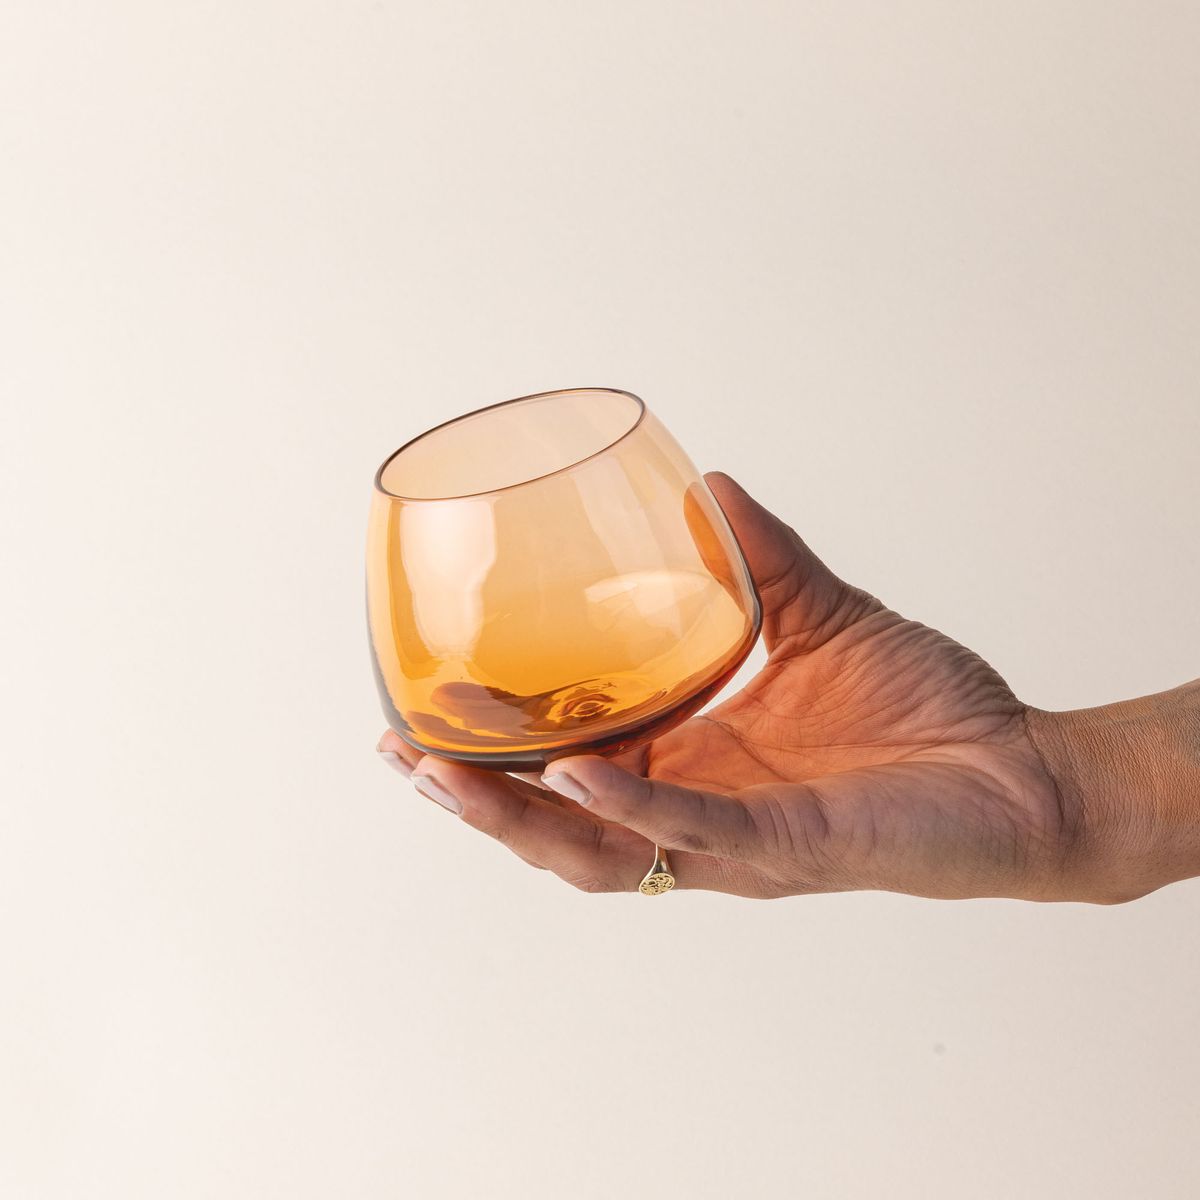 A hand holds a light orange glass whiskey snifter with a rounded base